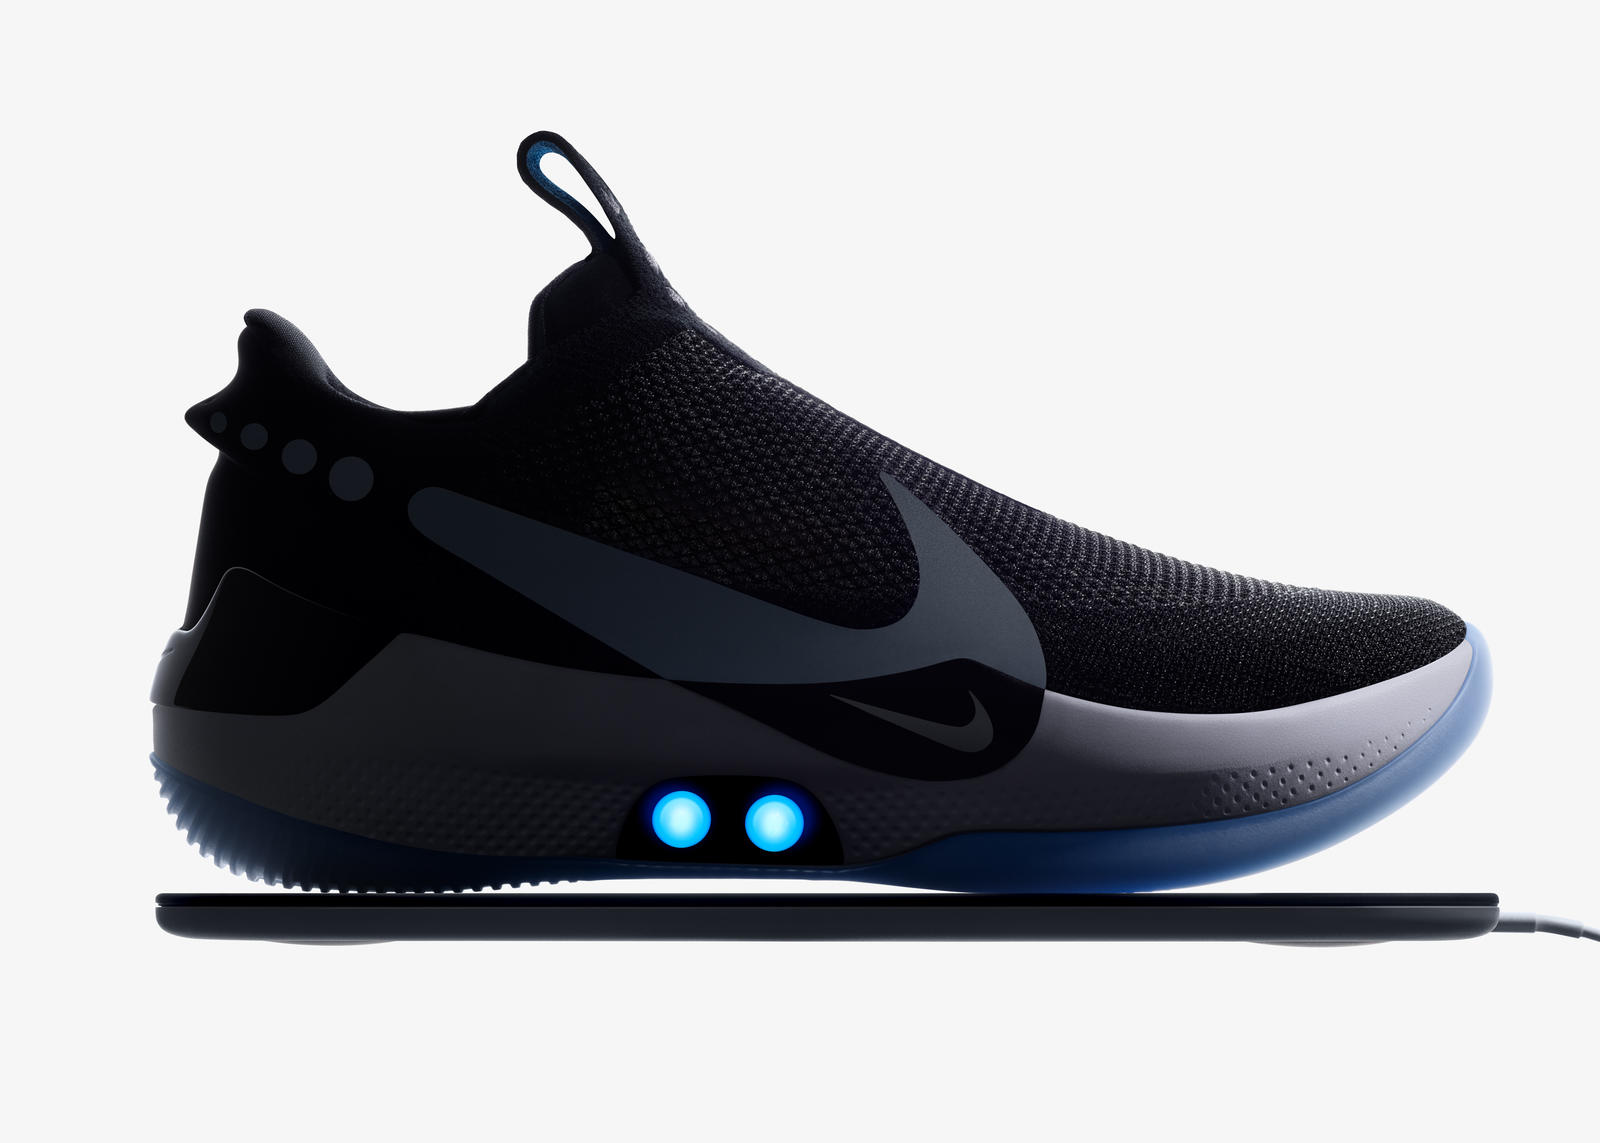 Nike launches the Nike Adapt BB 